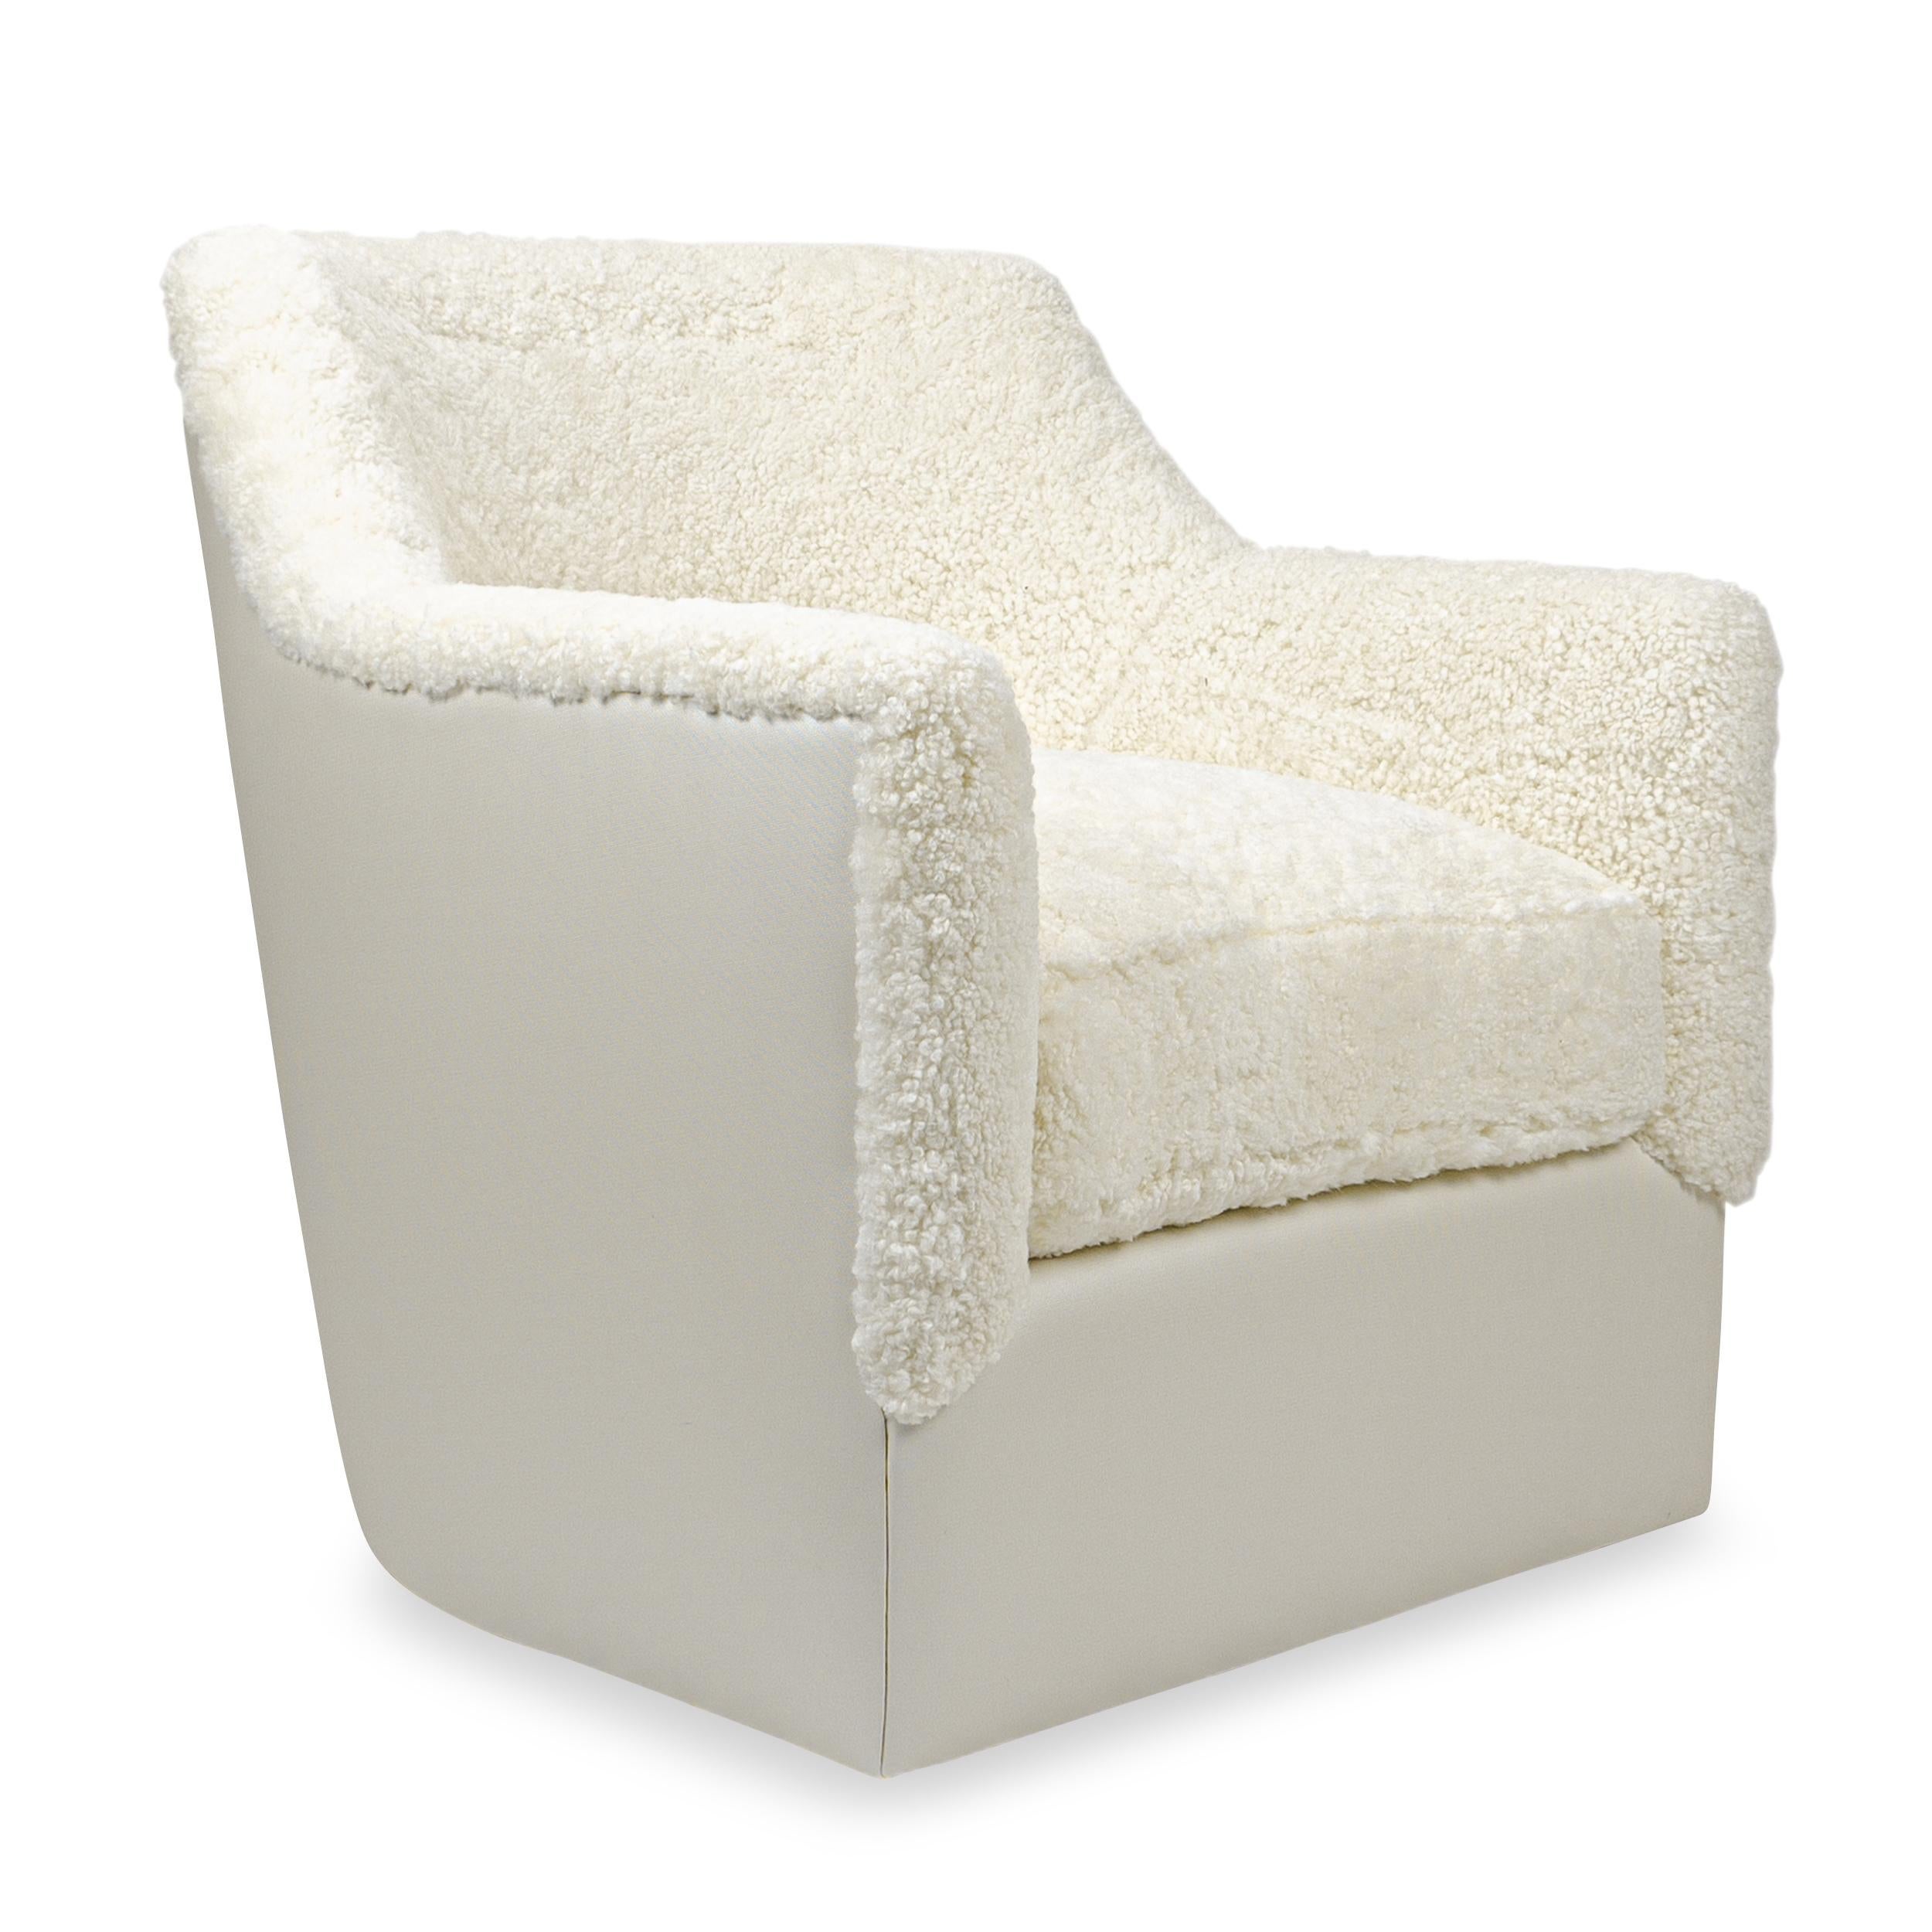 The Tyler Swivel chair is a contemporary swivel chair design that features track arms that curve up to the back. The loose cushion seat is handmade with foam and down feather wrap for a comfortable seating experience. The chairs shown are